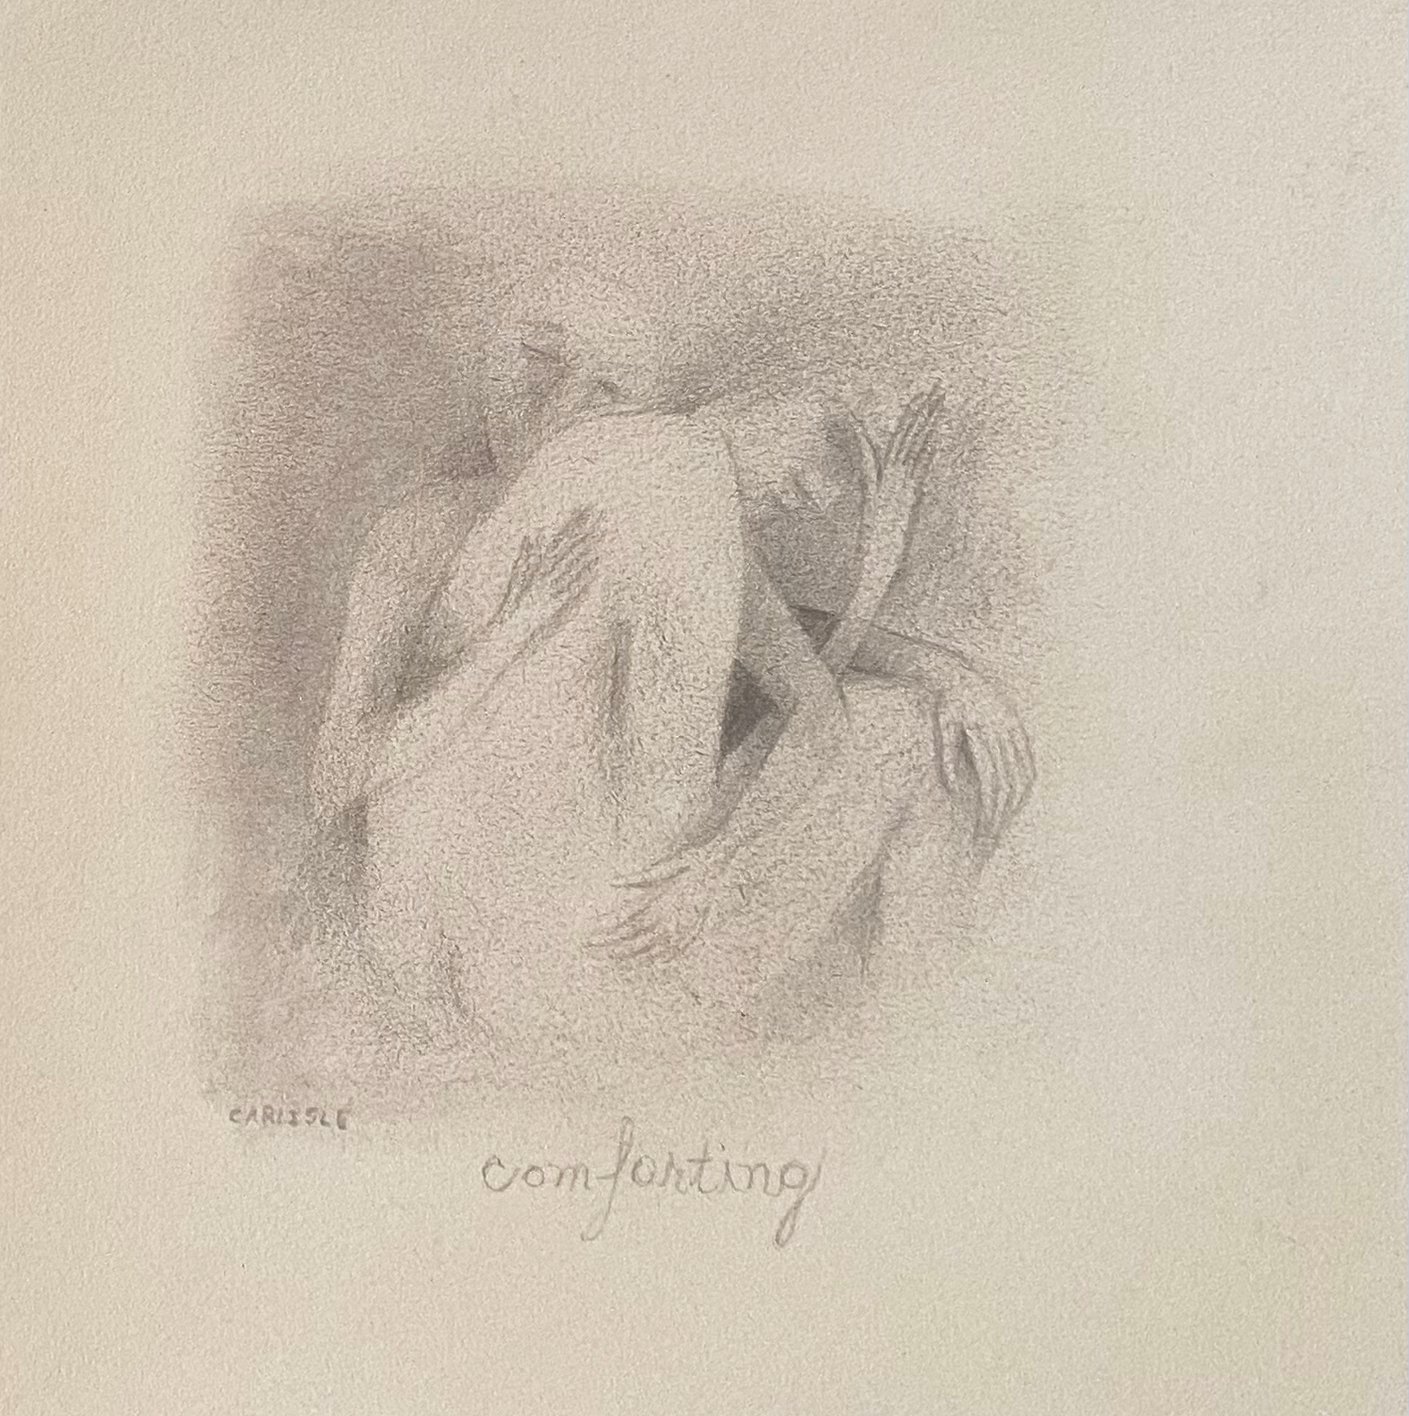 Image of Comforting with Matting 8" x 10"